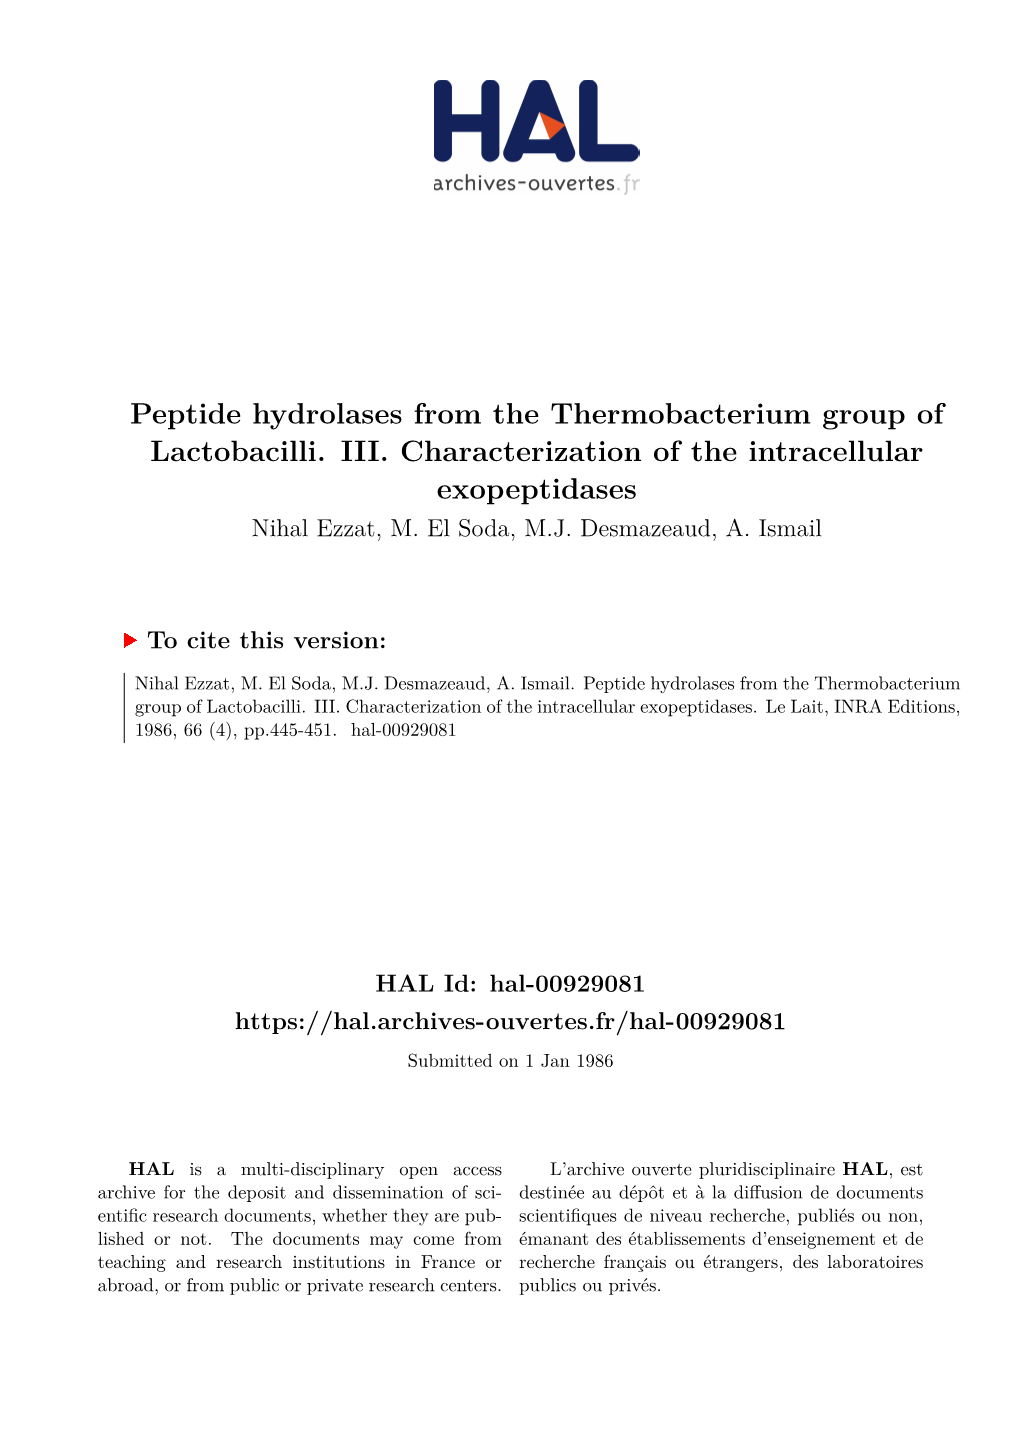 Peptide Hydrolases from the Thermobacterium Group of Lactobacilli